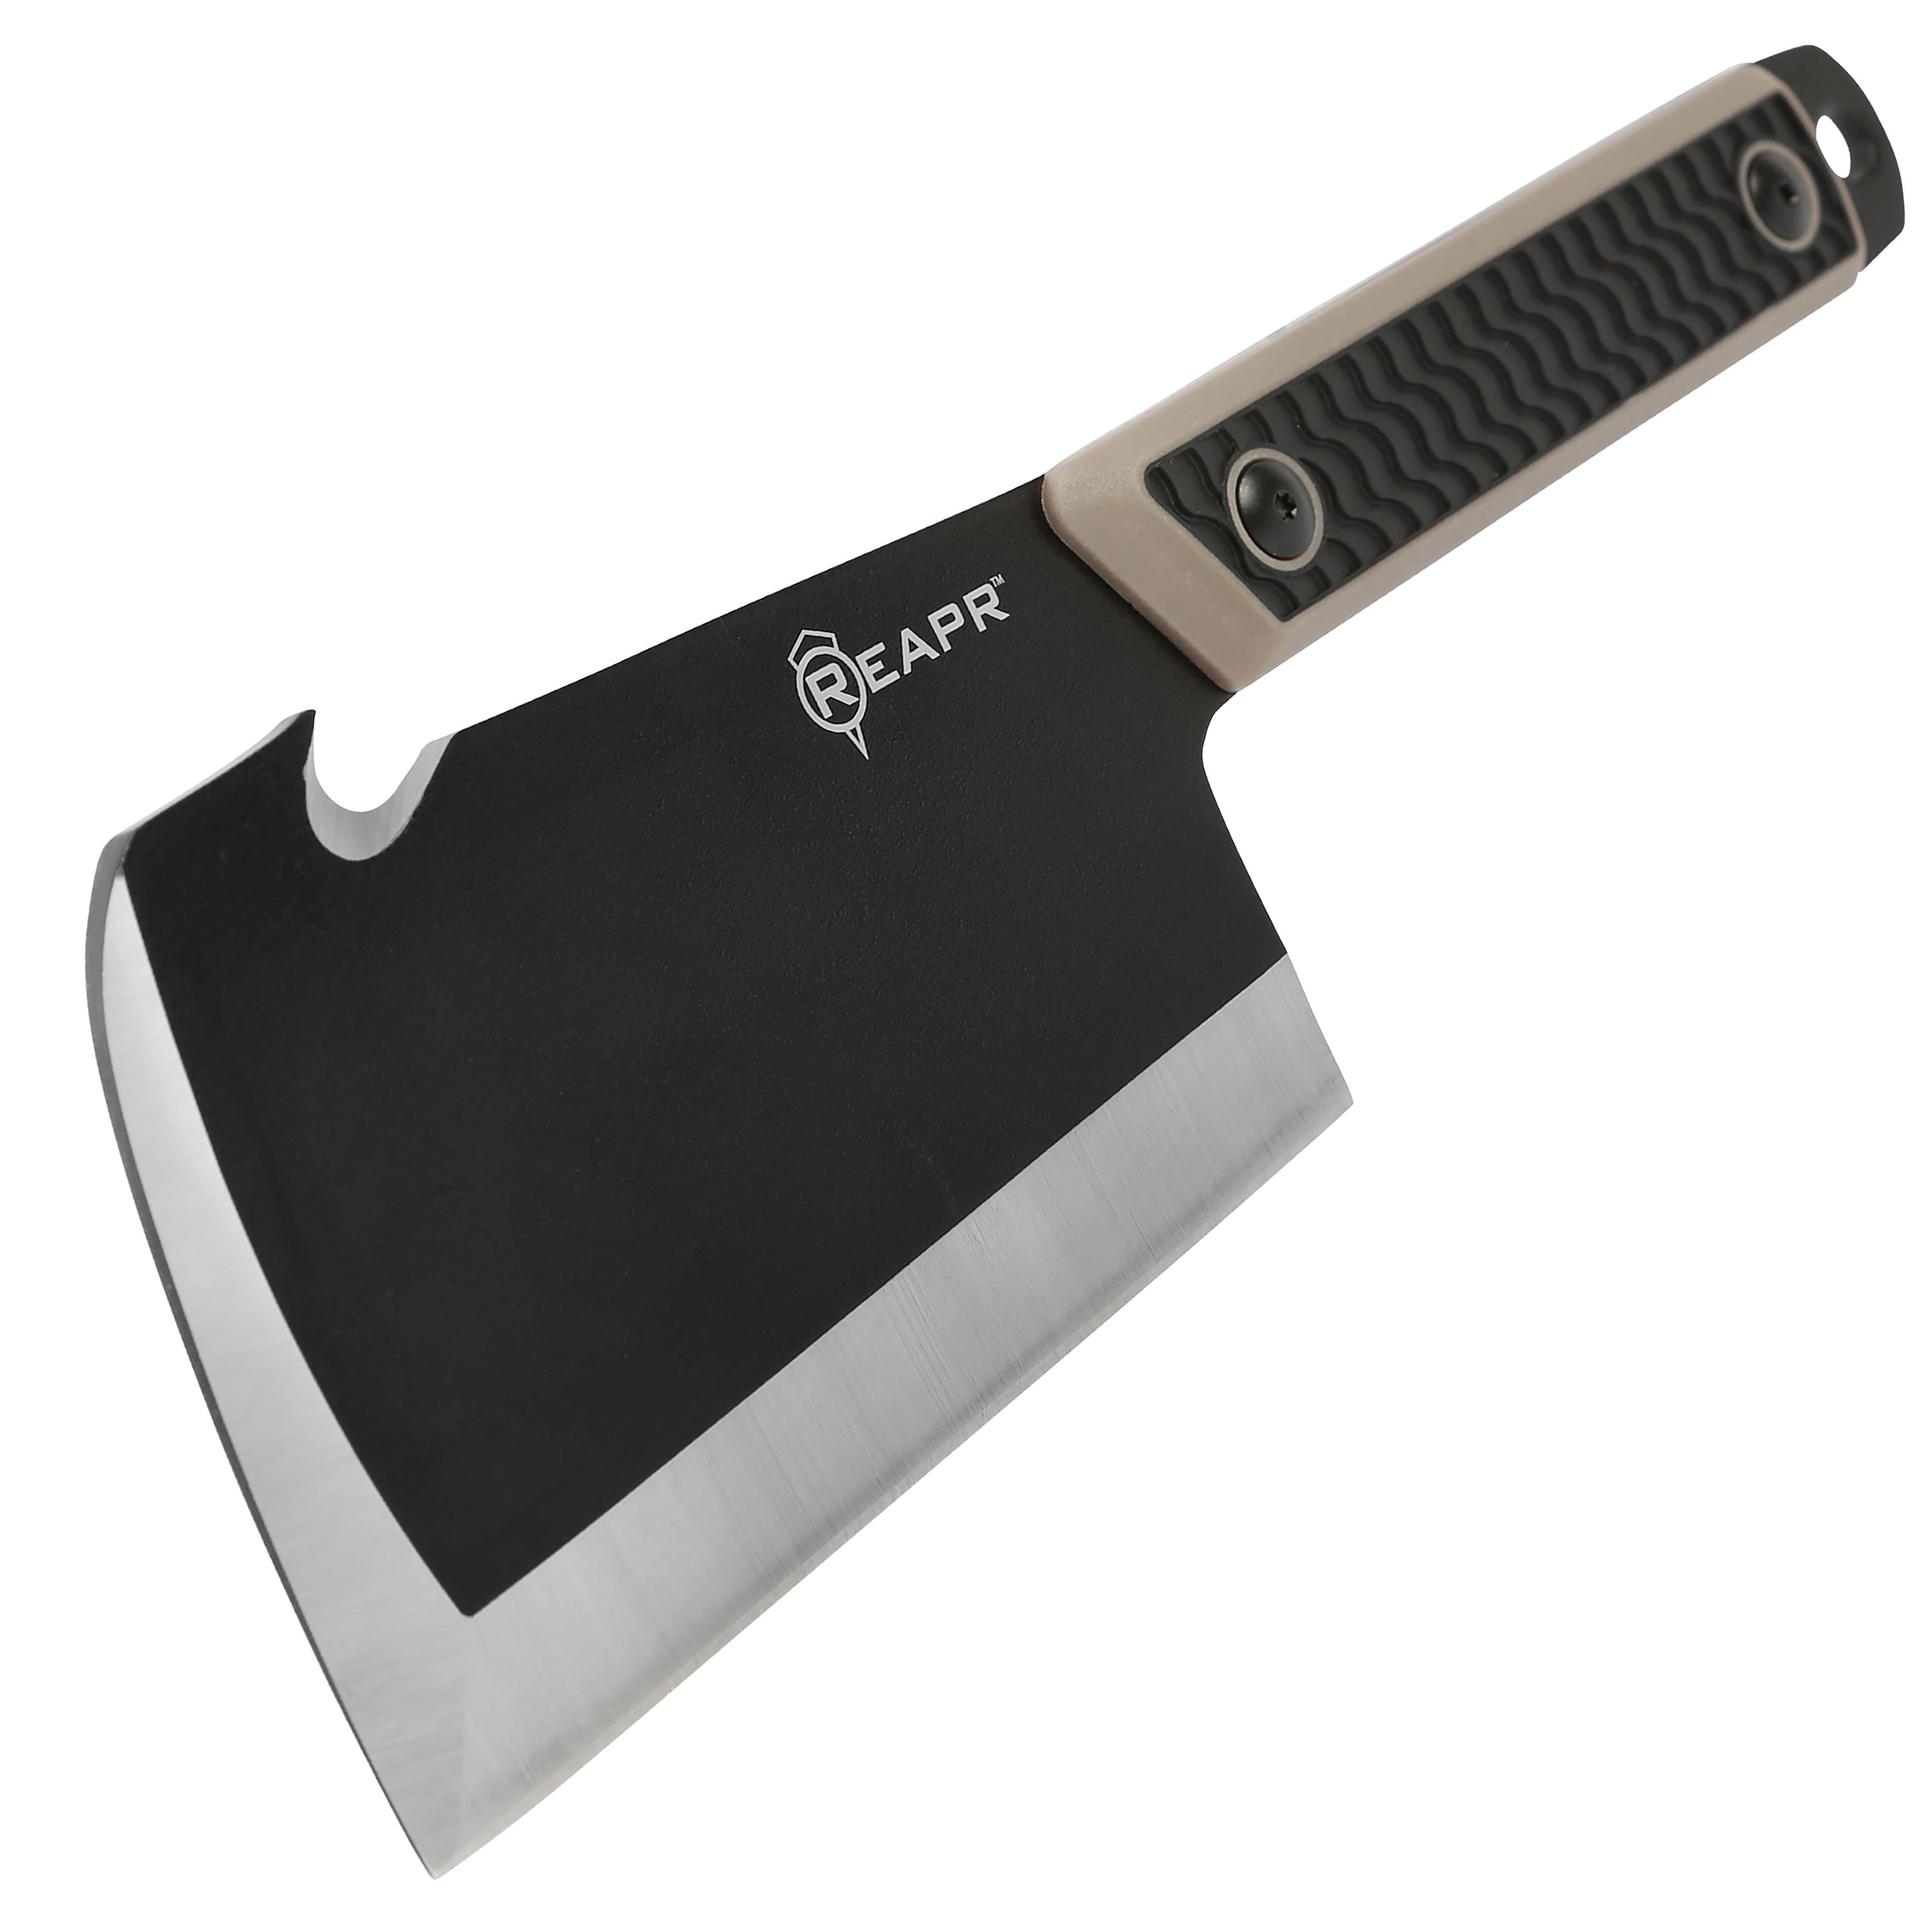 VICTORINOX CURVED MEAT CLEAVER - Rush's Kitchen